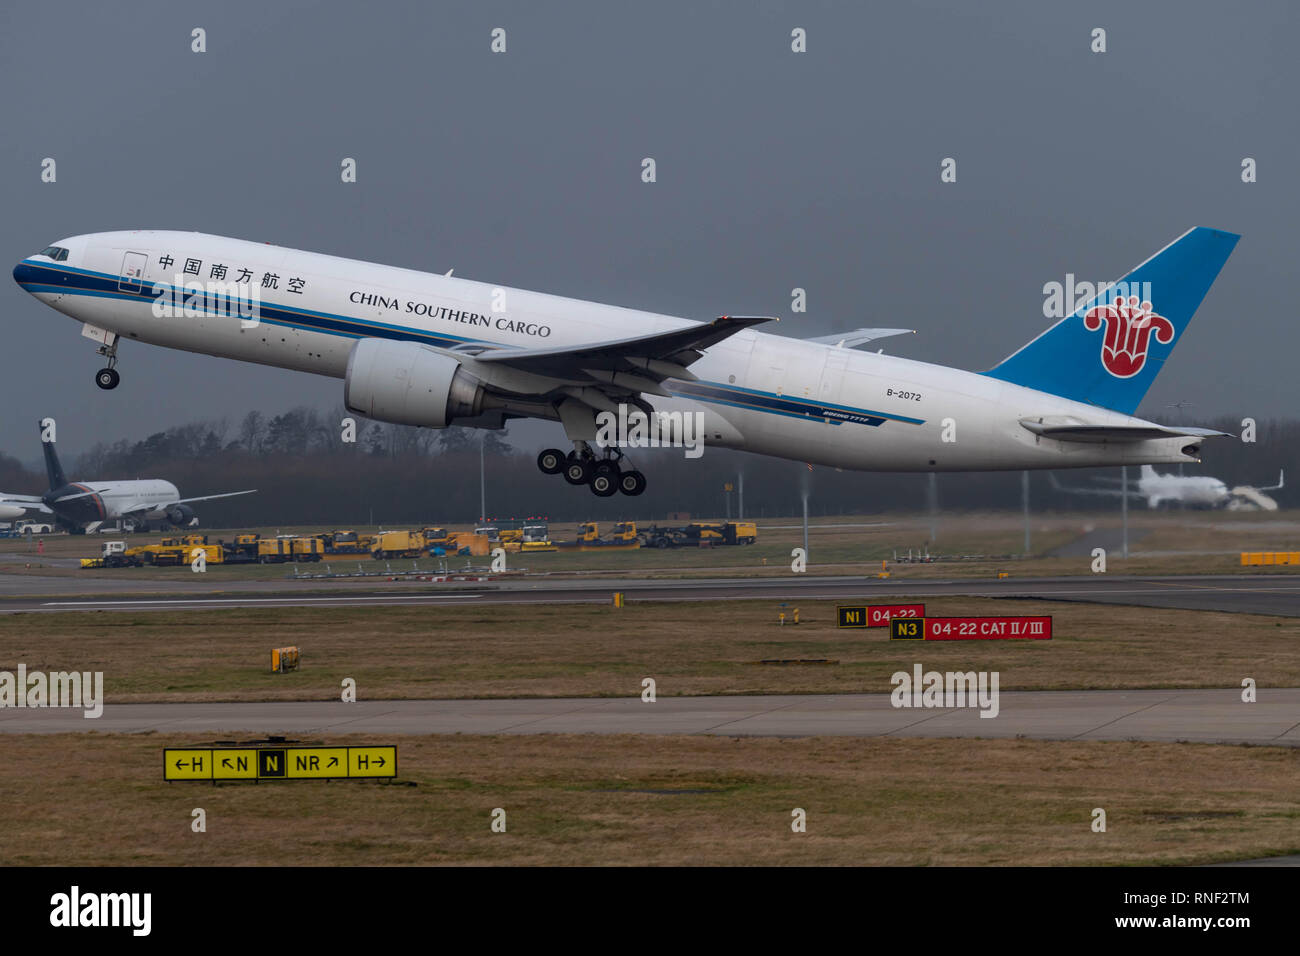 Stansted Airport comerercial aircraft China Southern Airlines cargo Boeing 777 takes off Stock Photo